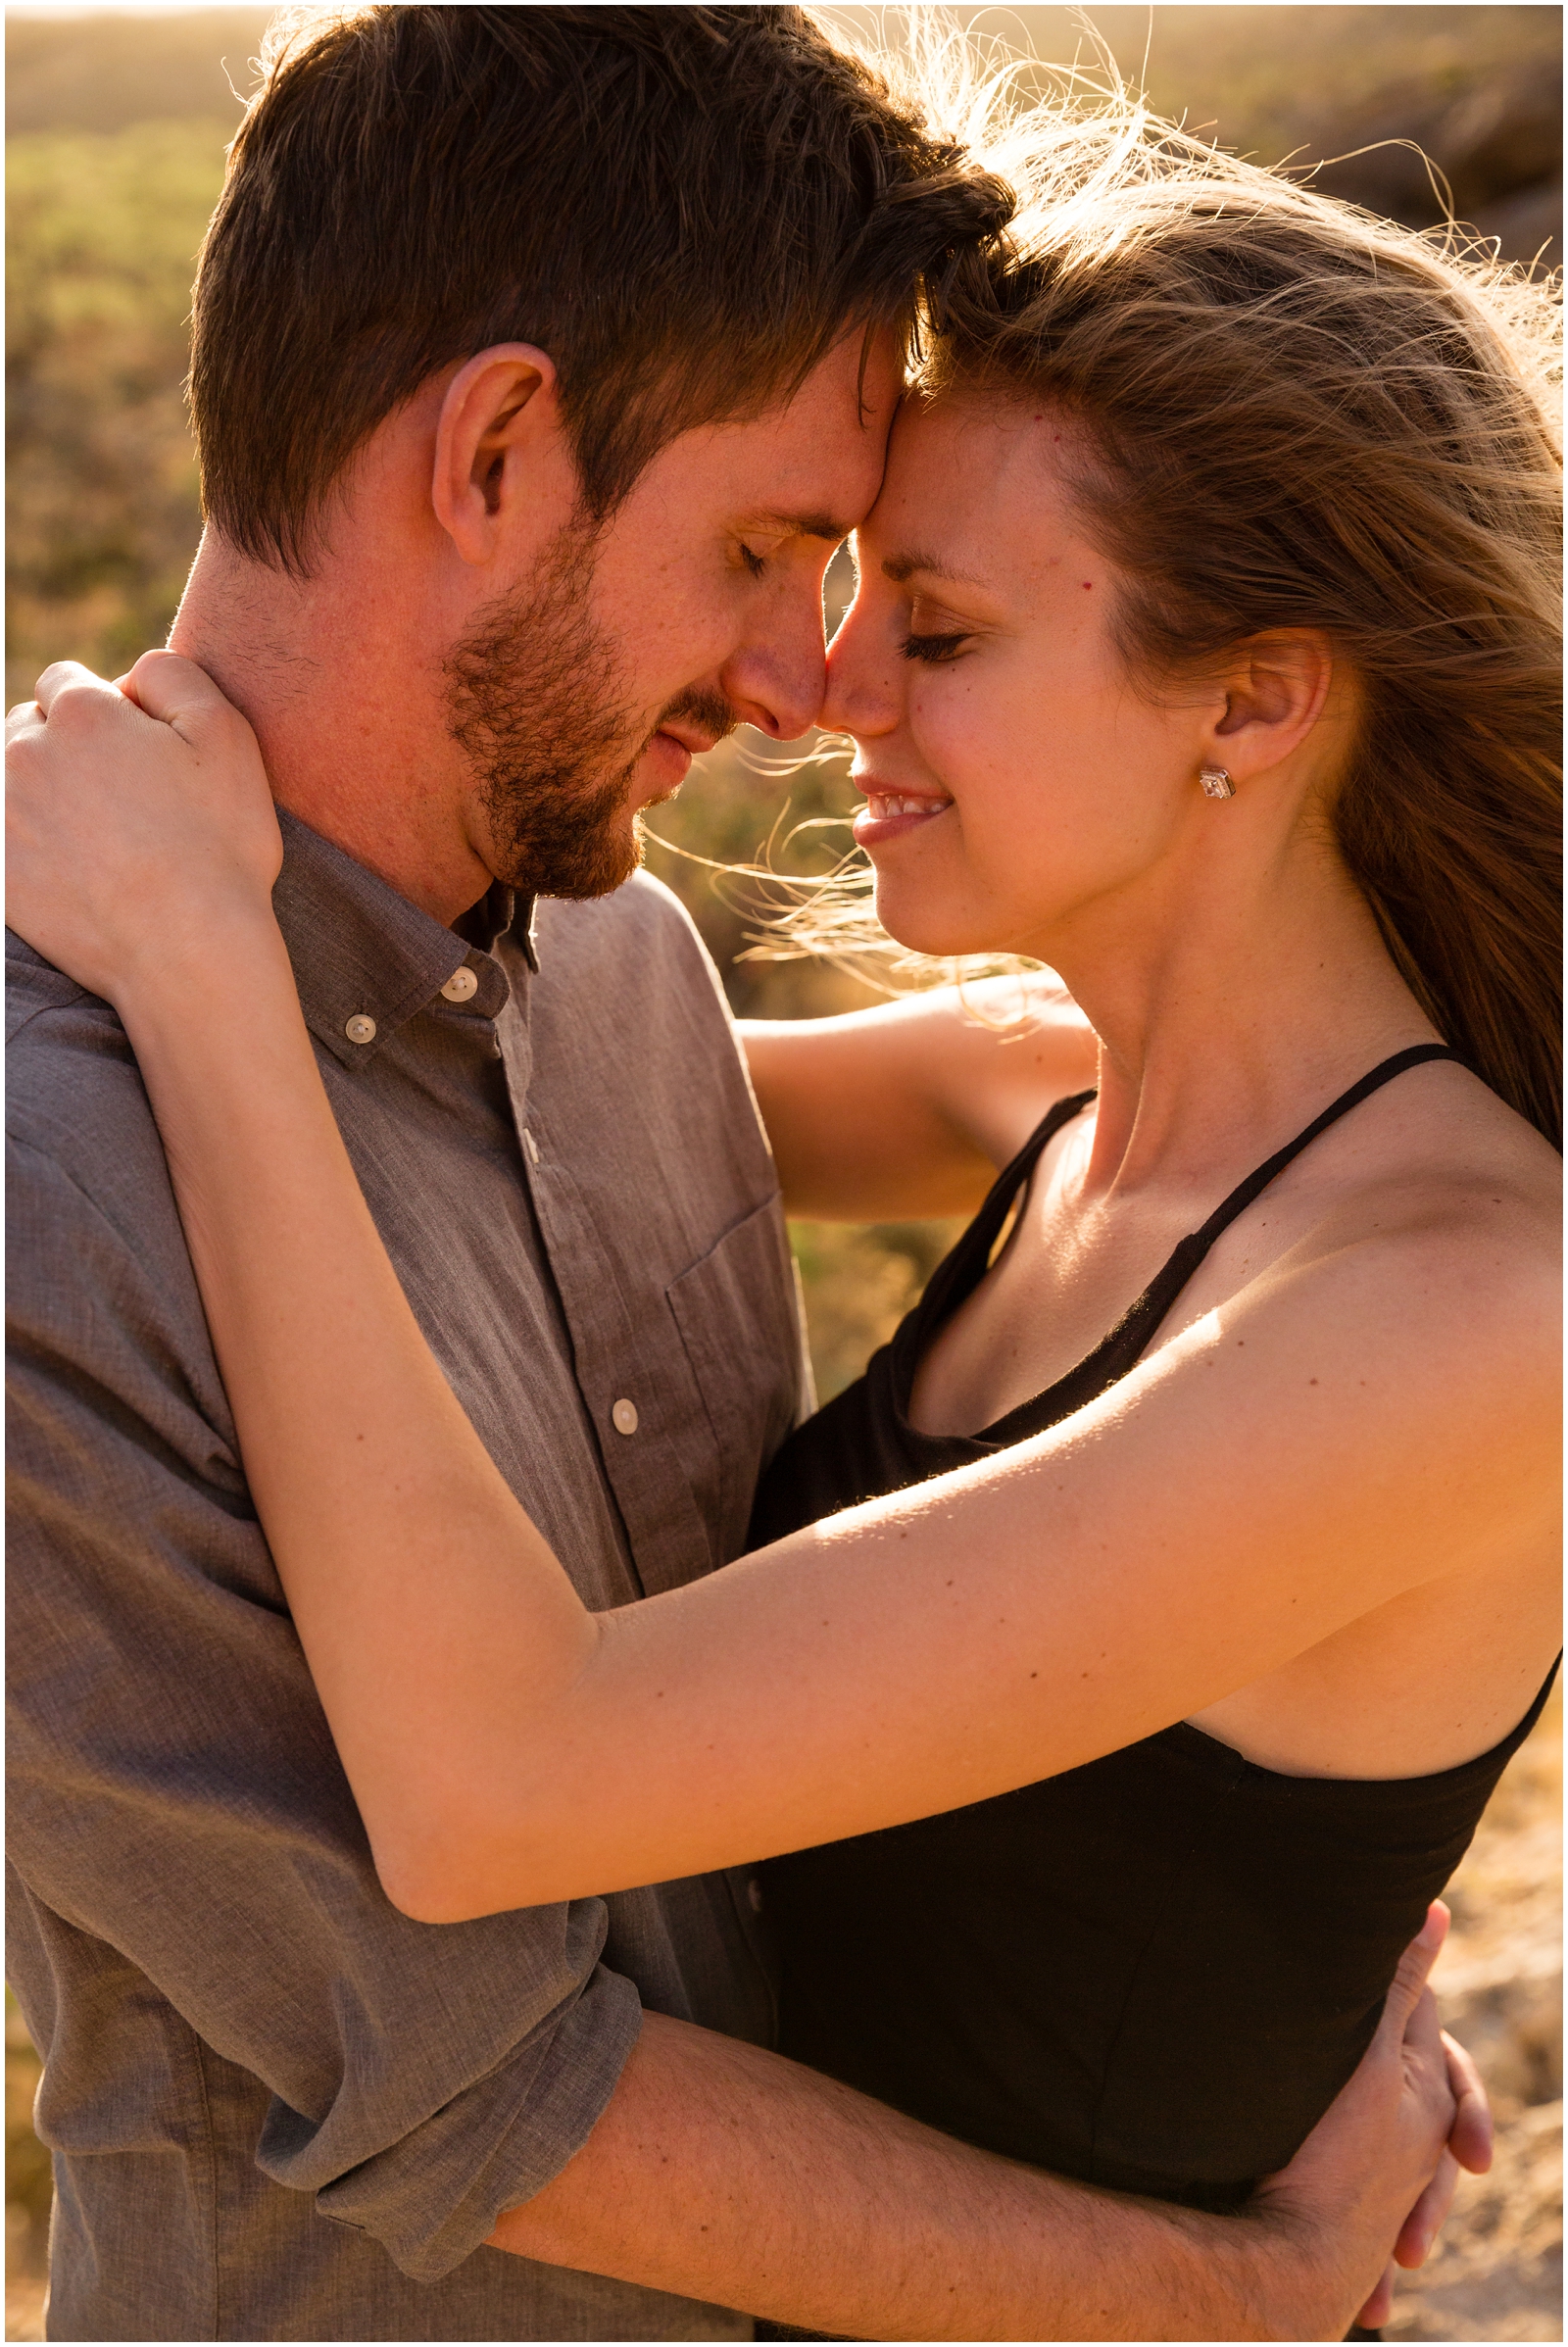 Golden hour is the perfect time for snuggles with the one you love! This couple was all cuddles during golden hour at their Arizona adventure session in Saguaro National Park. | Clarissa Wylde Photography